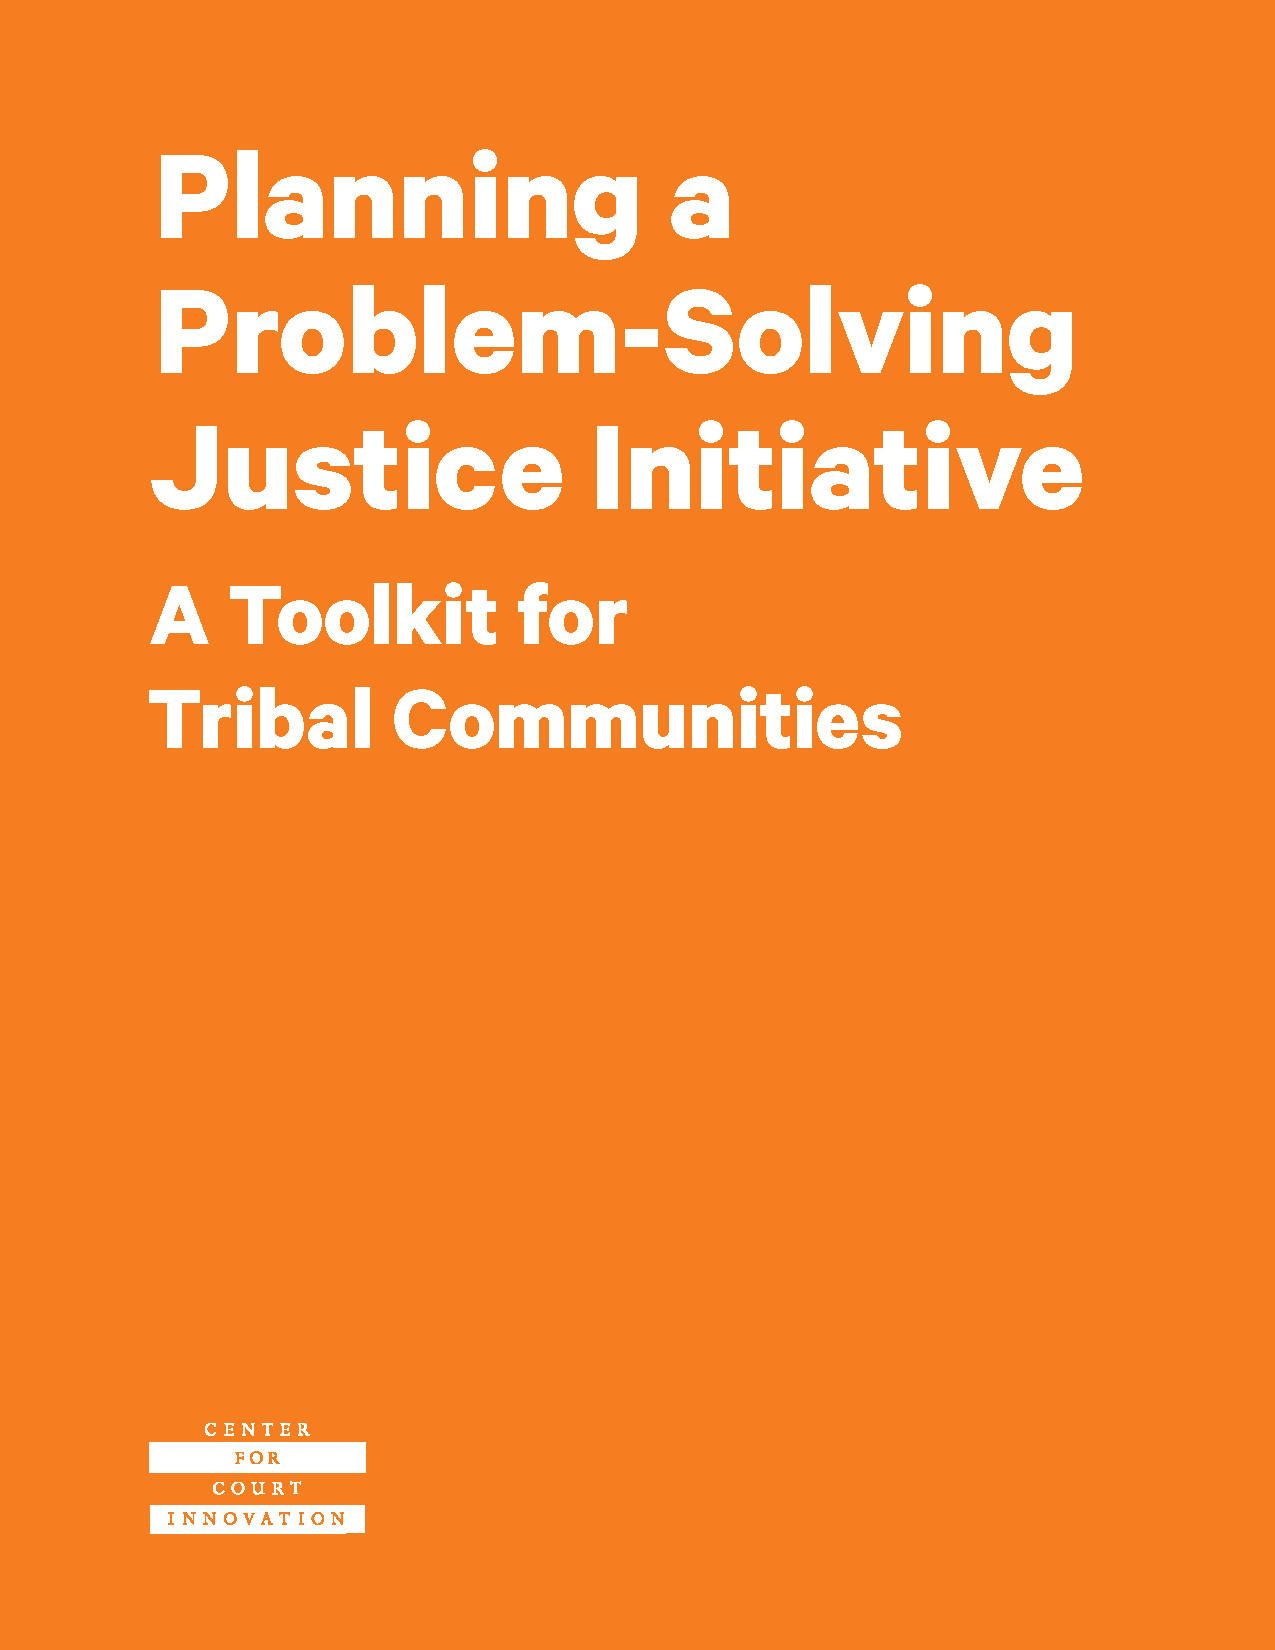 Planning a Problem-Solving Justice Initiative - A Toolkit for Tribal Communities